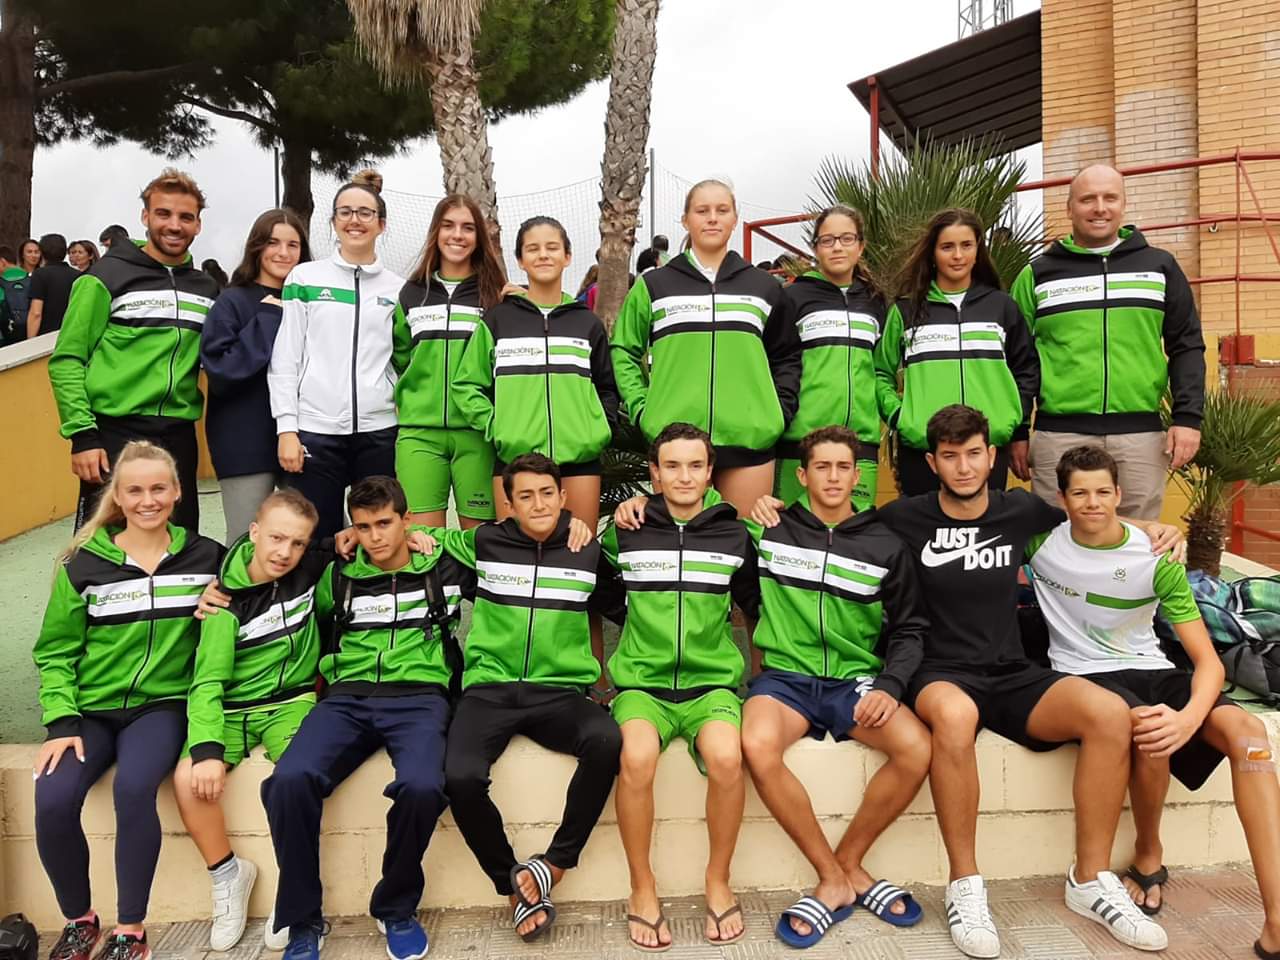 A group of people pose for a photo in green swim-team jackets